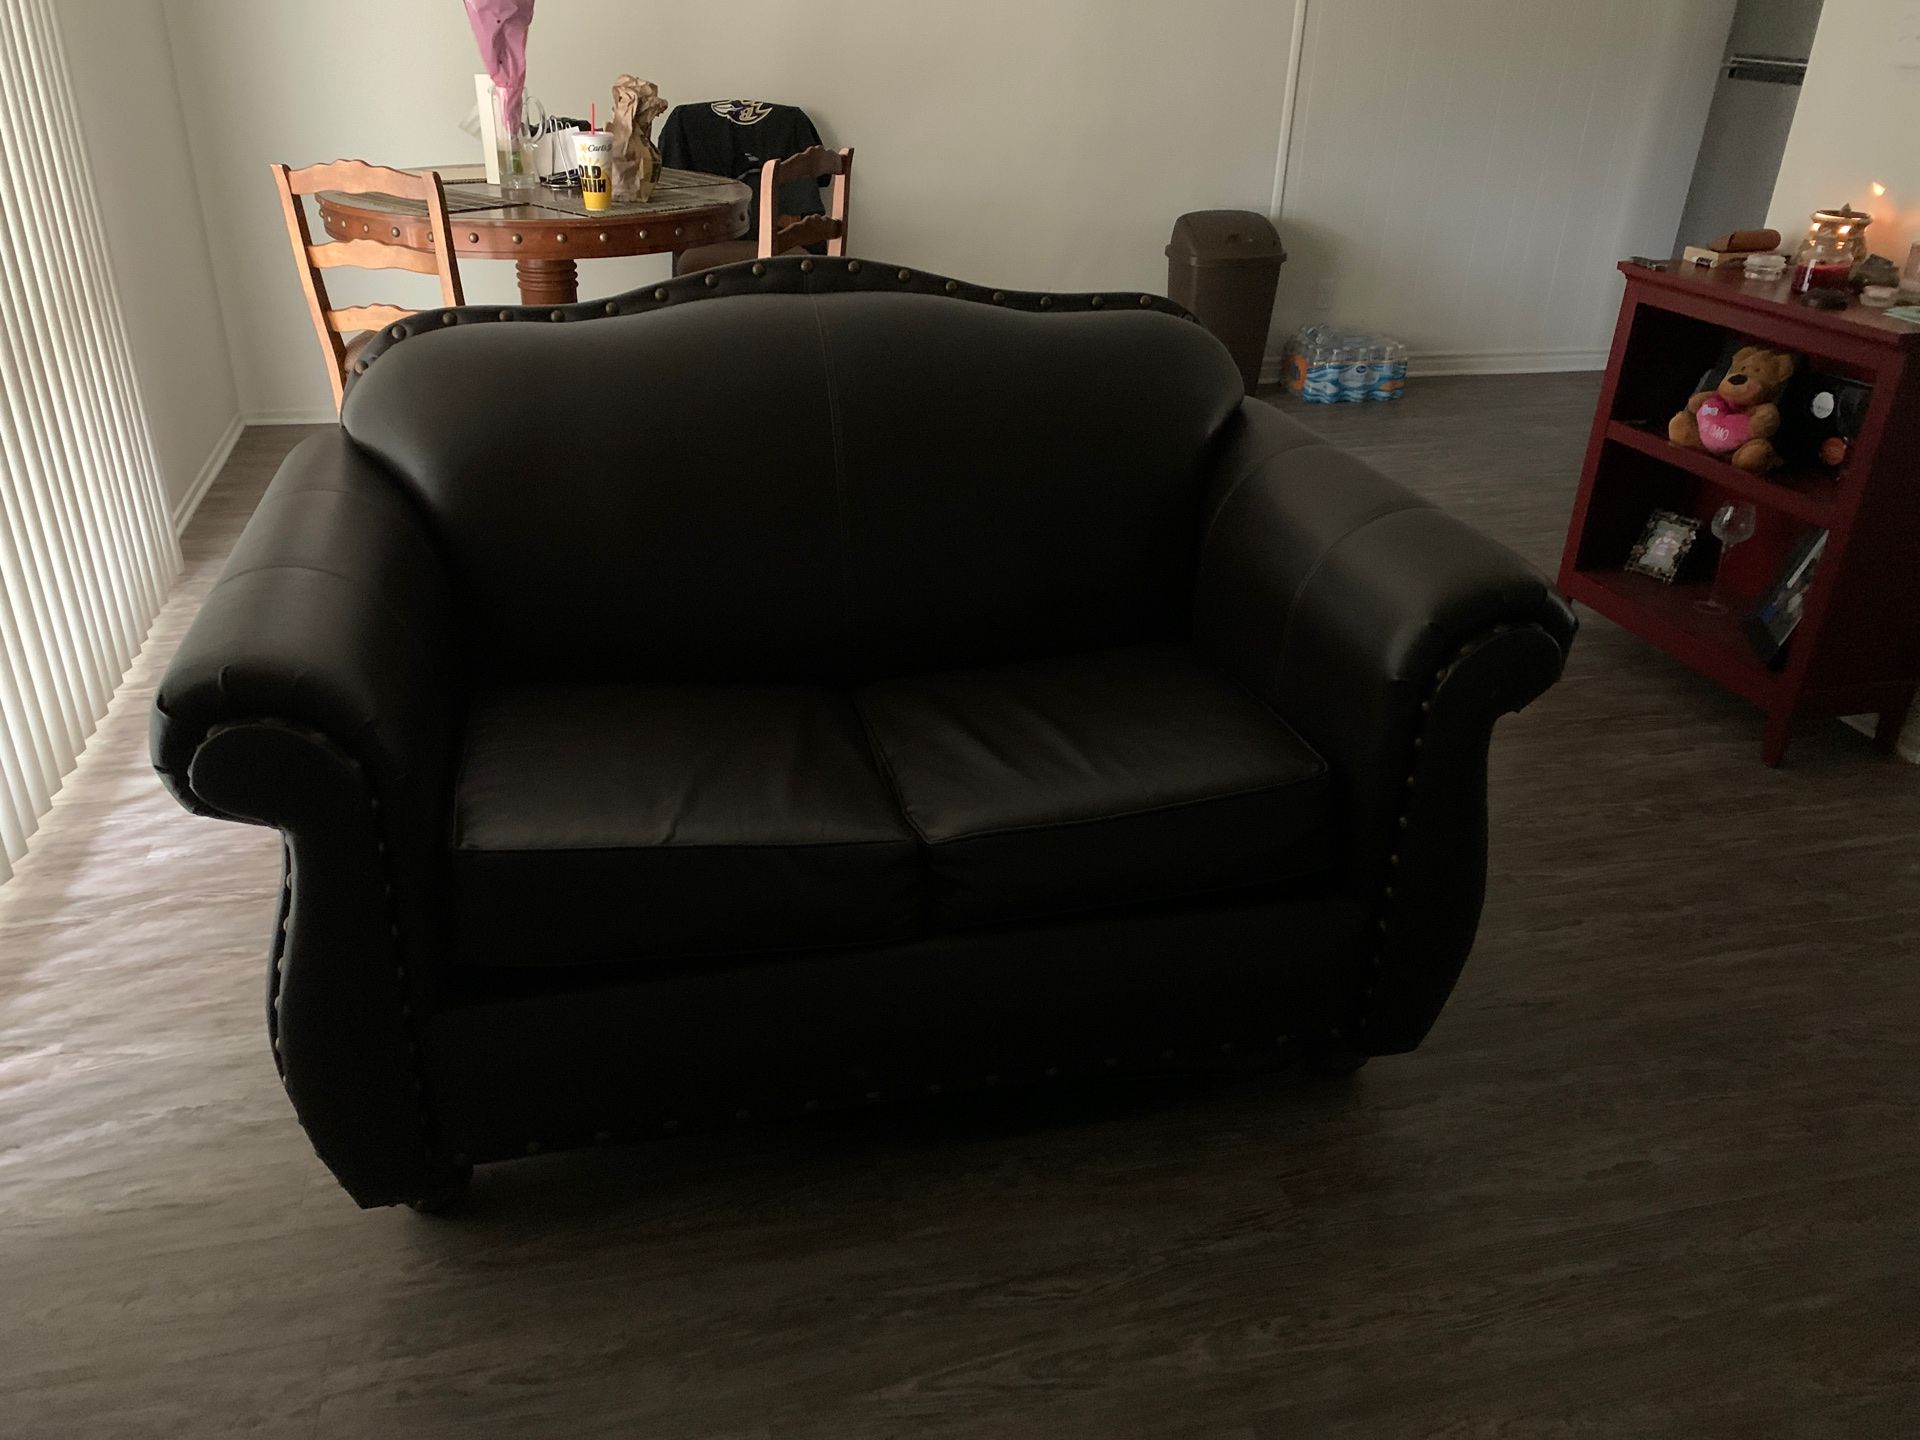 Selling black couch 75-100$